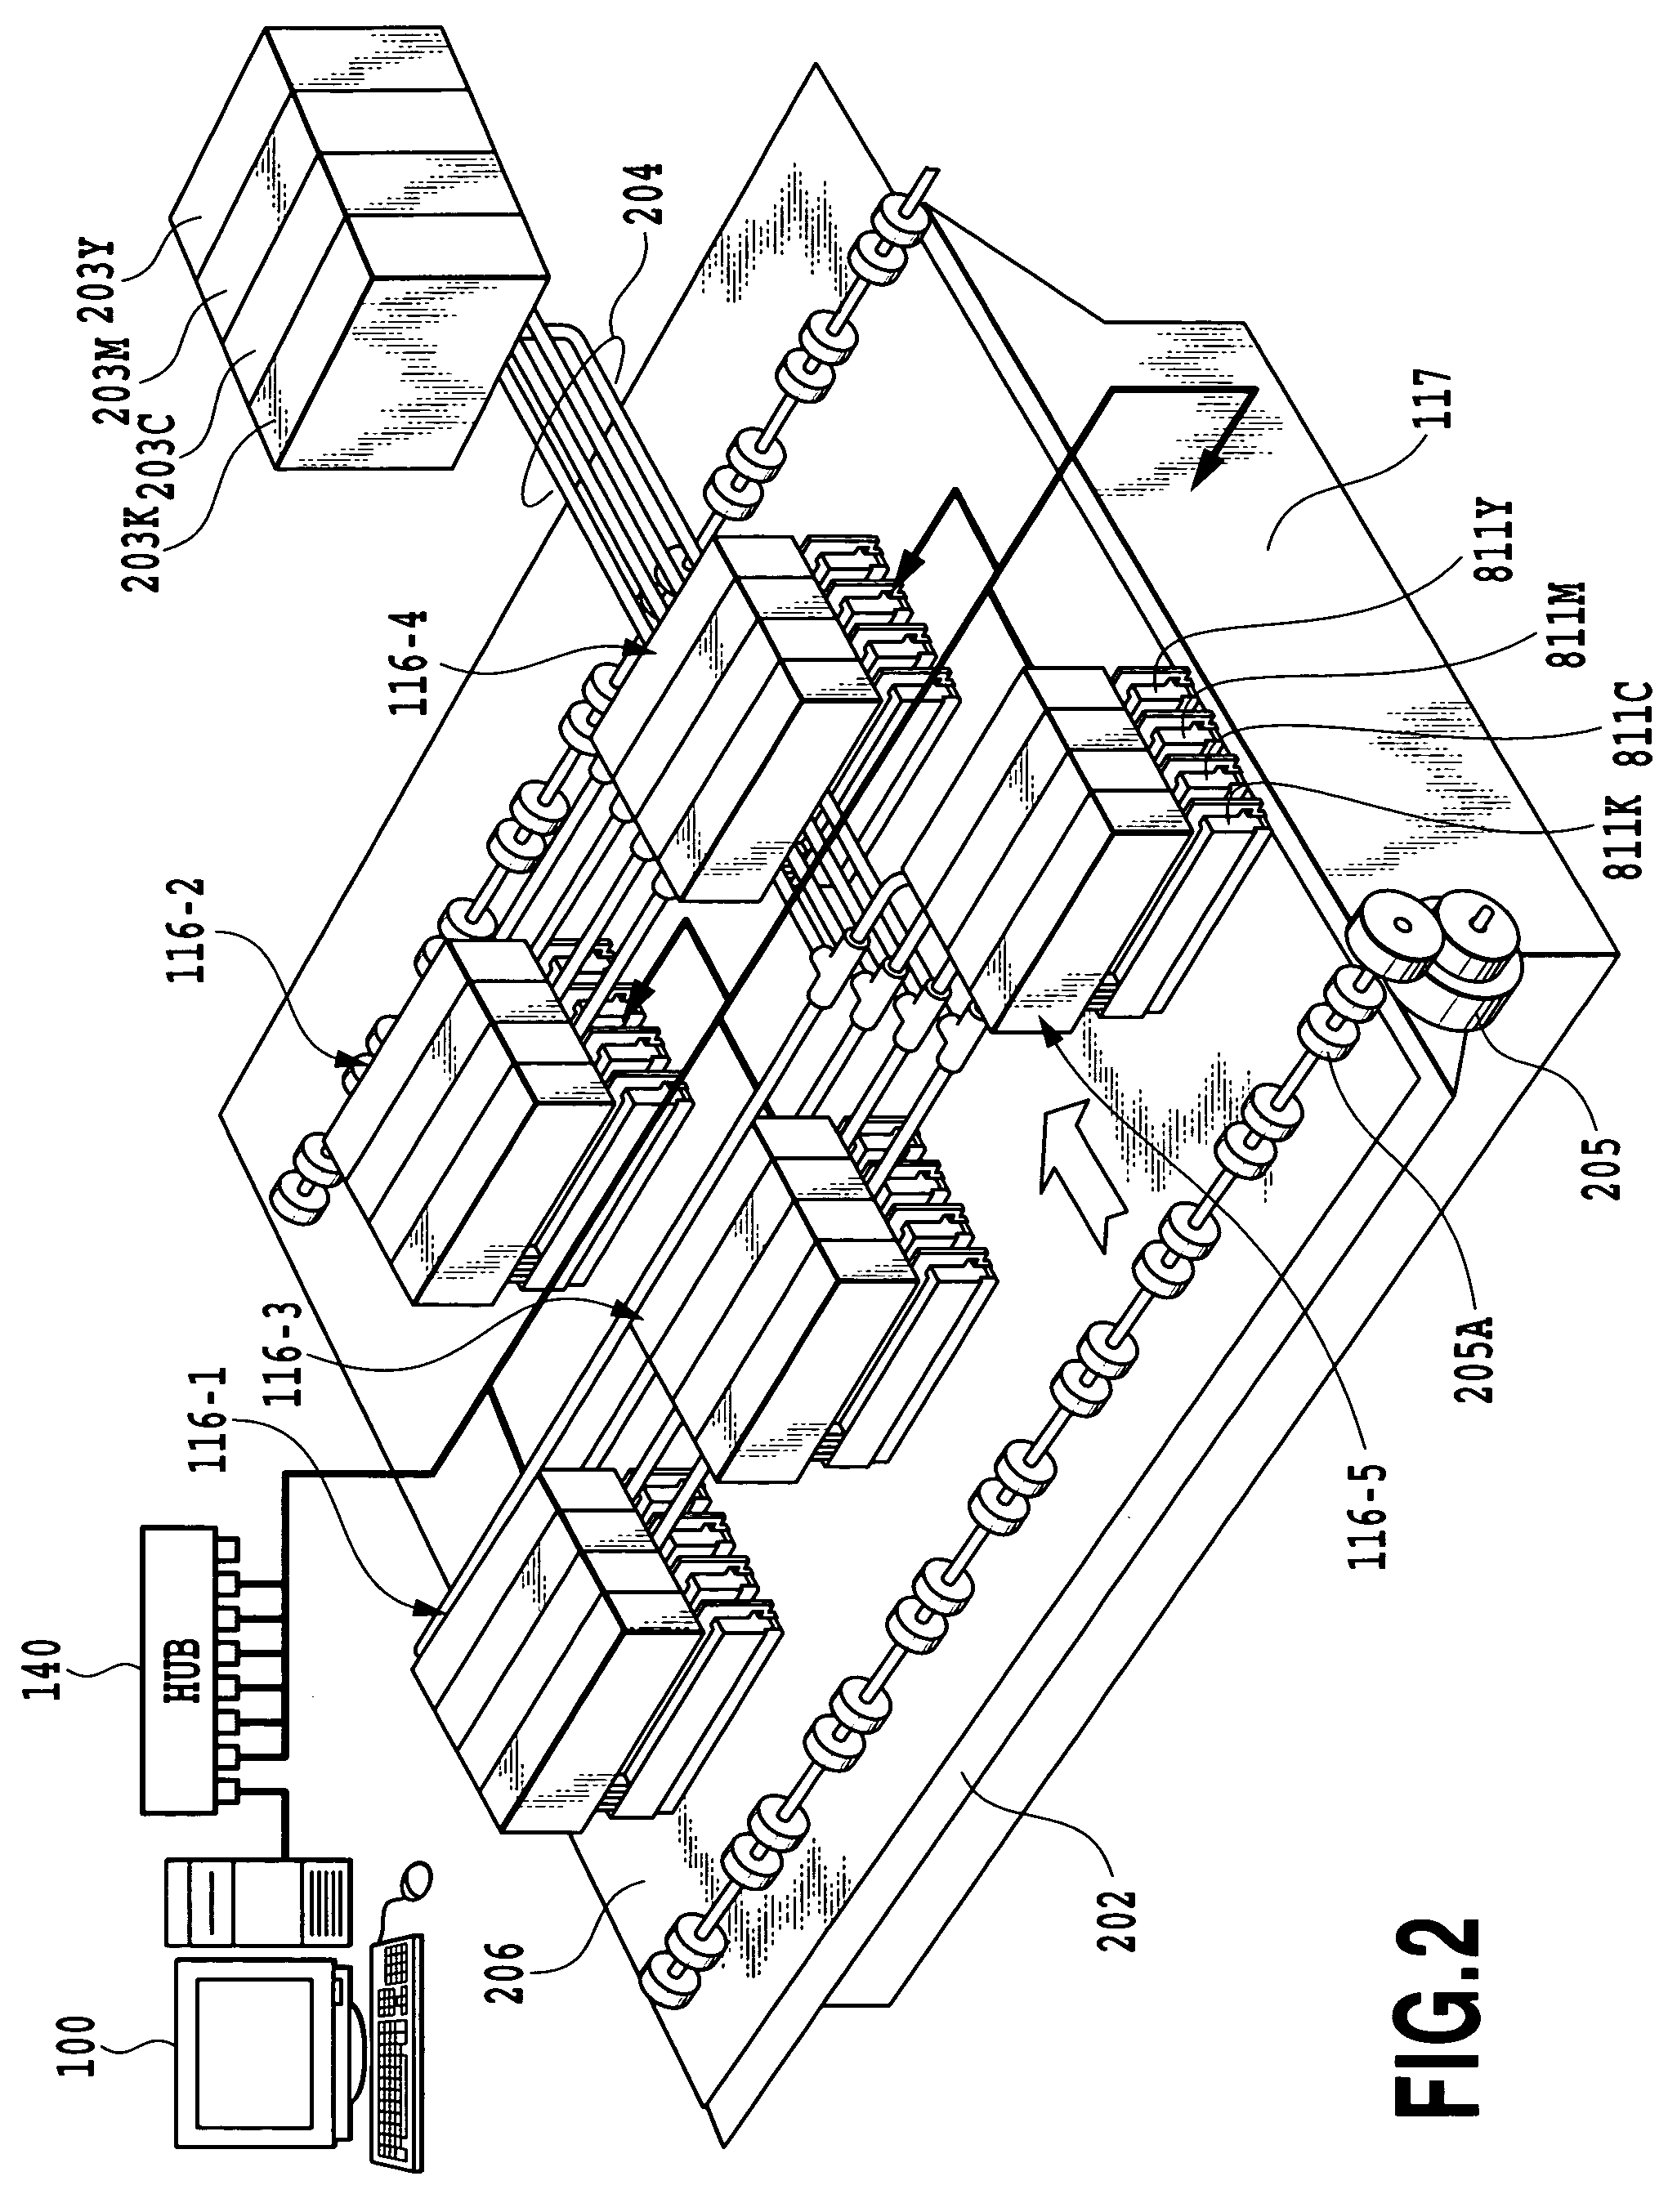 Ink supply apparatus and method for controlling the ink pressure in a print head